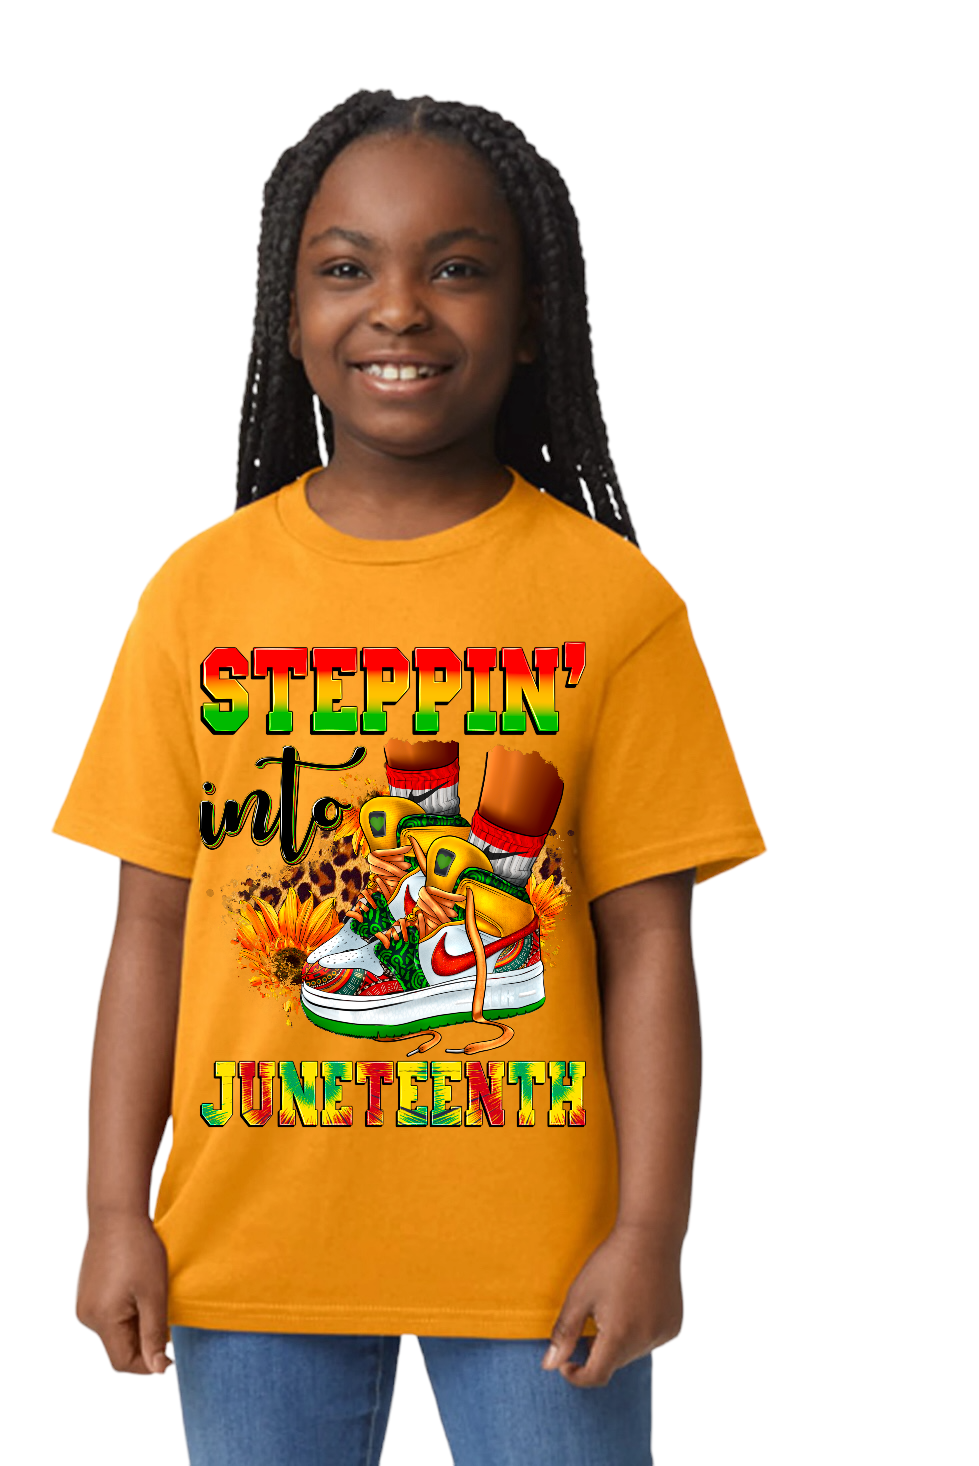 Steppin Into Juneteenth in sneakers Kids Edition Shirts